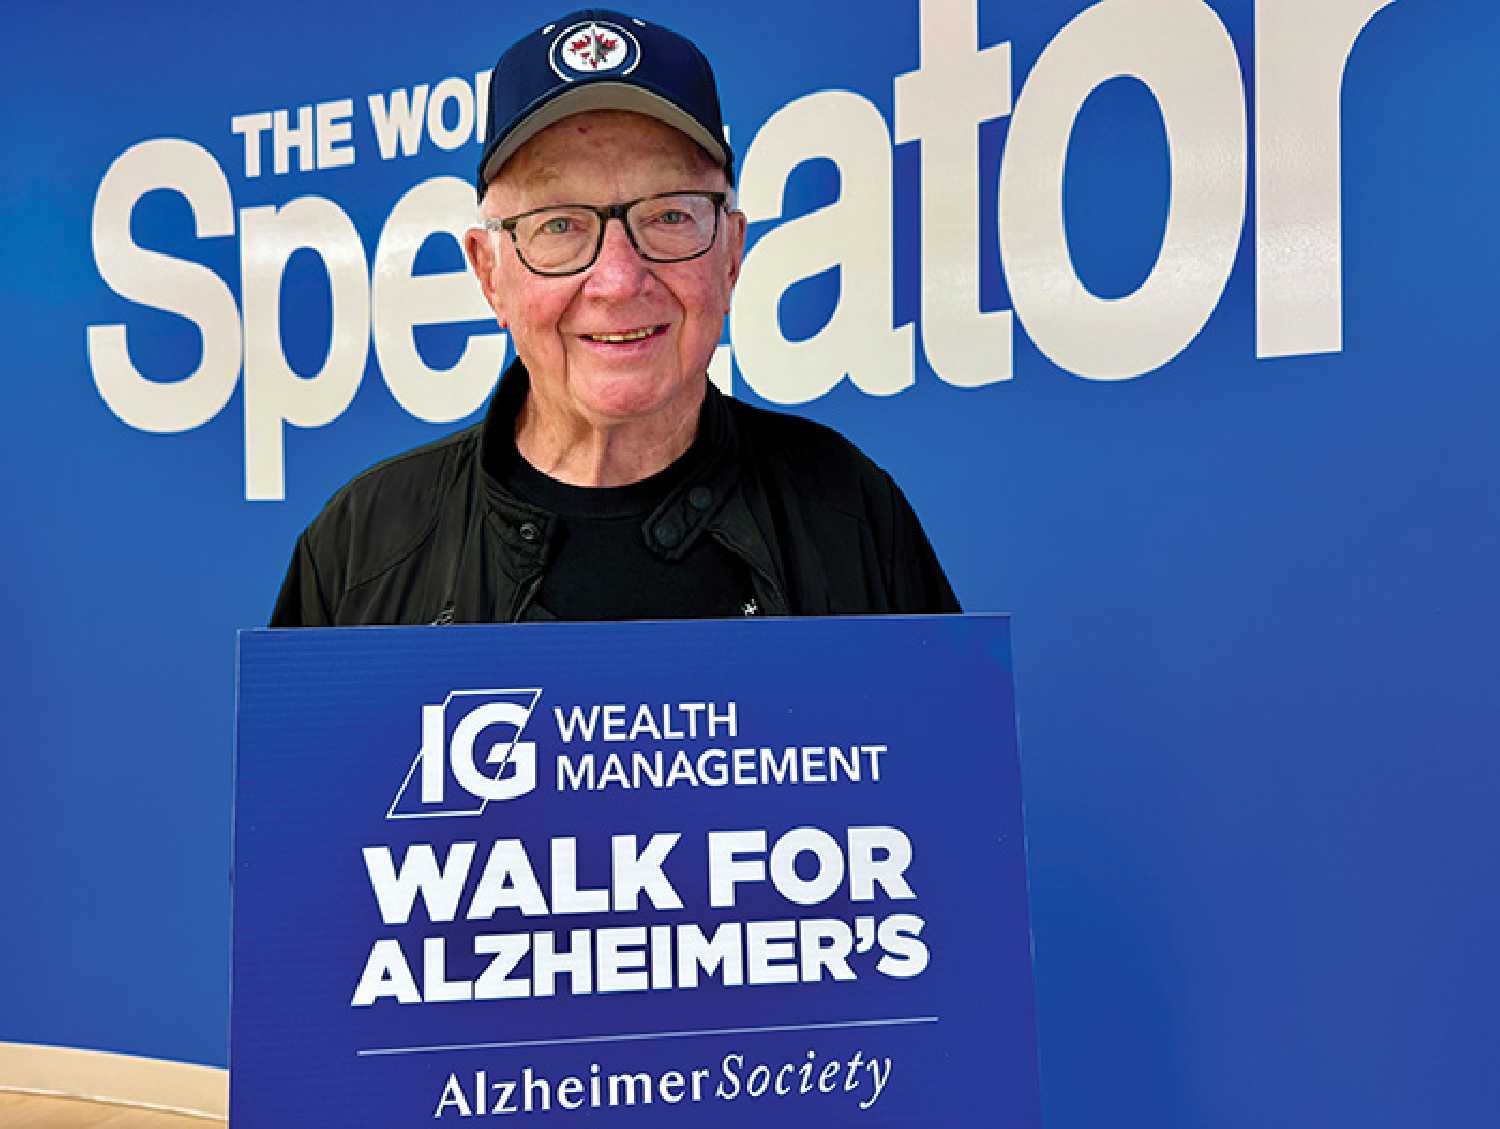 Bill Thorn is one of the organizers of the Walk for Alzheimers coming up in Moosomin this Saturday, May 25. After reading an article on how Alzheimers has affected the Thorn family, a family friend has anonymously donated $100,000 to the cause.